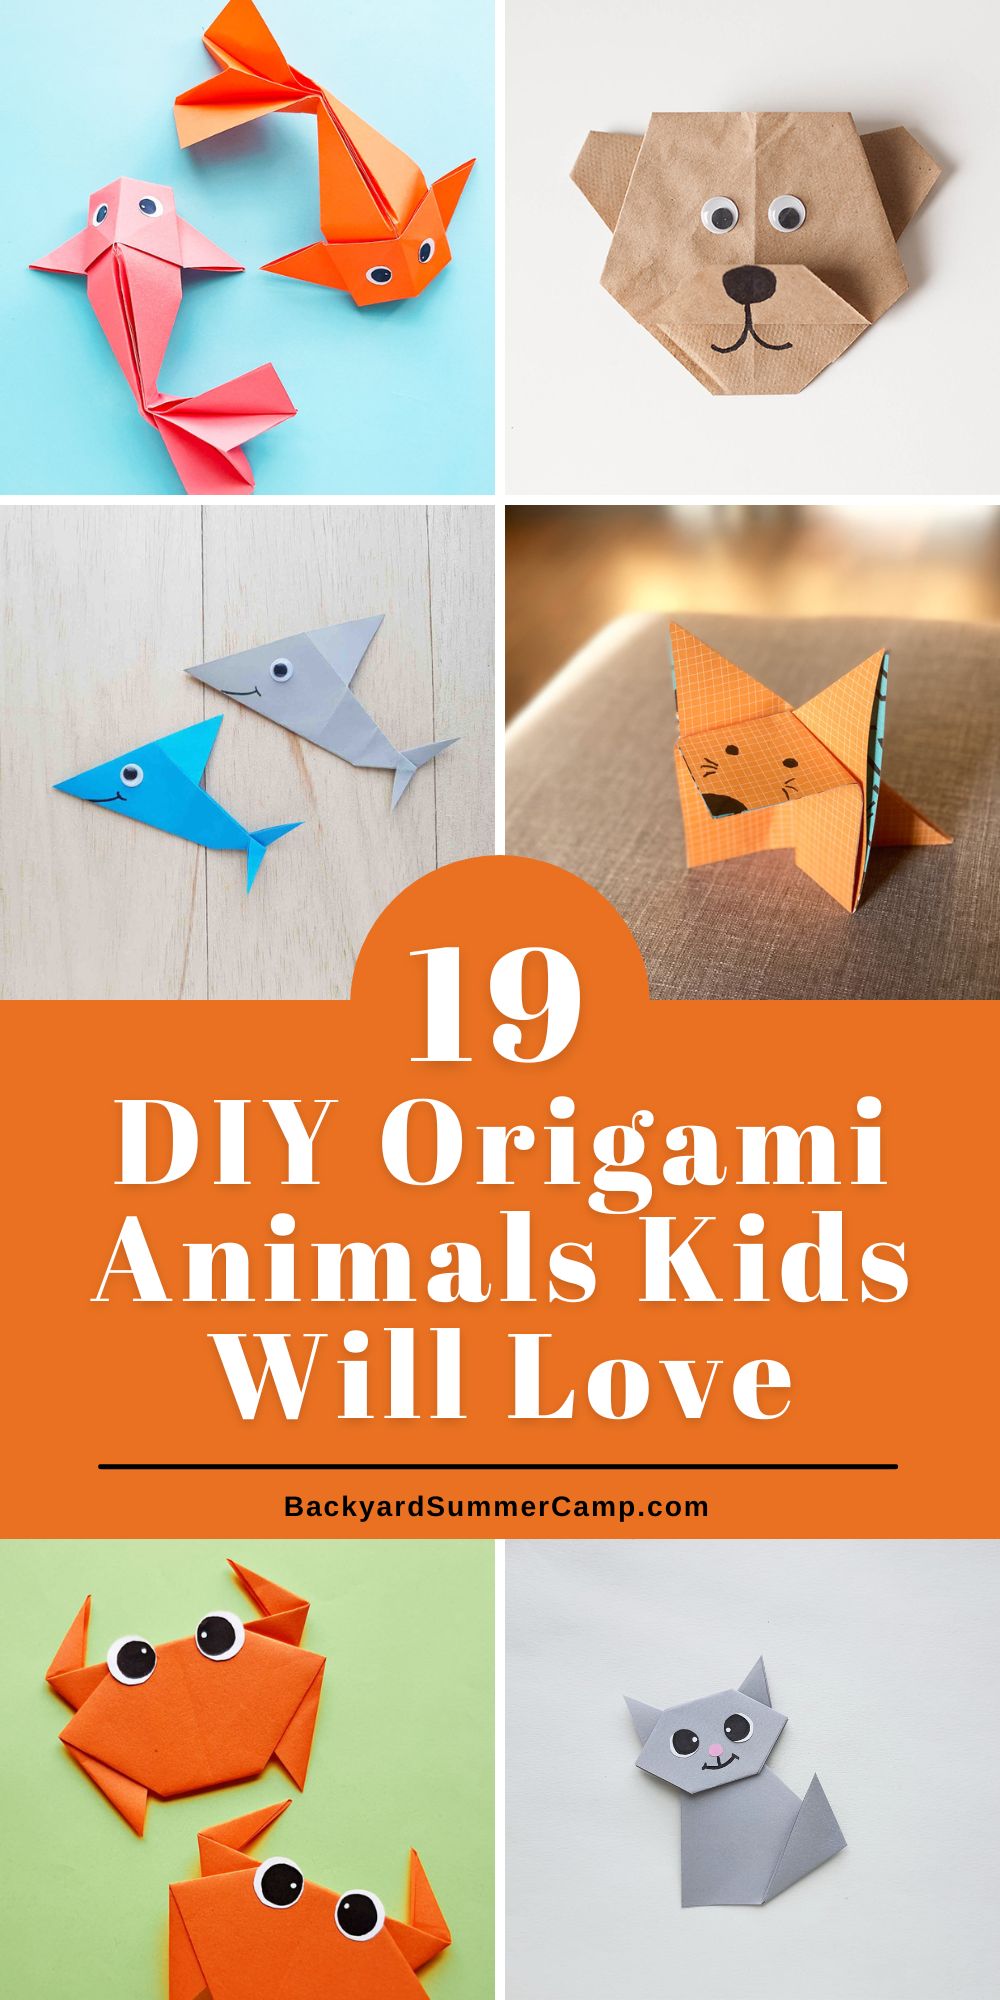 Collage of DIY origami animals including koi fish, a gray cat, a brown bear face, and a fox.